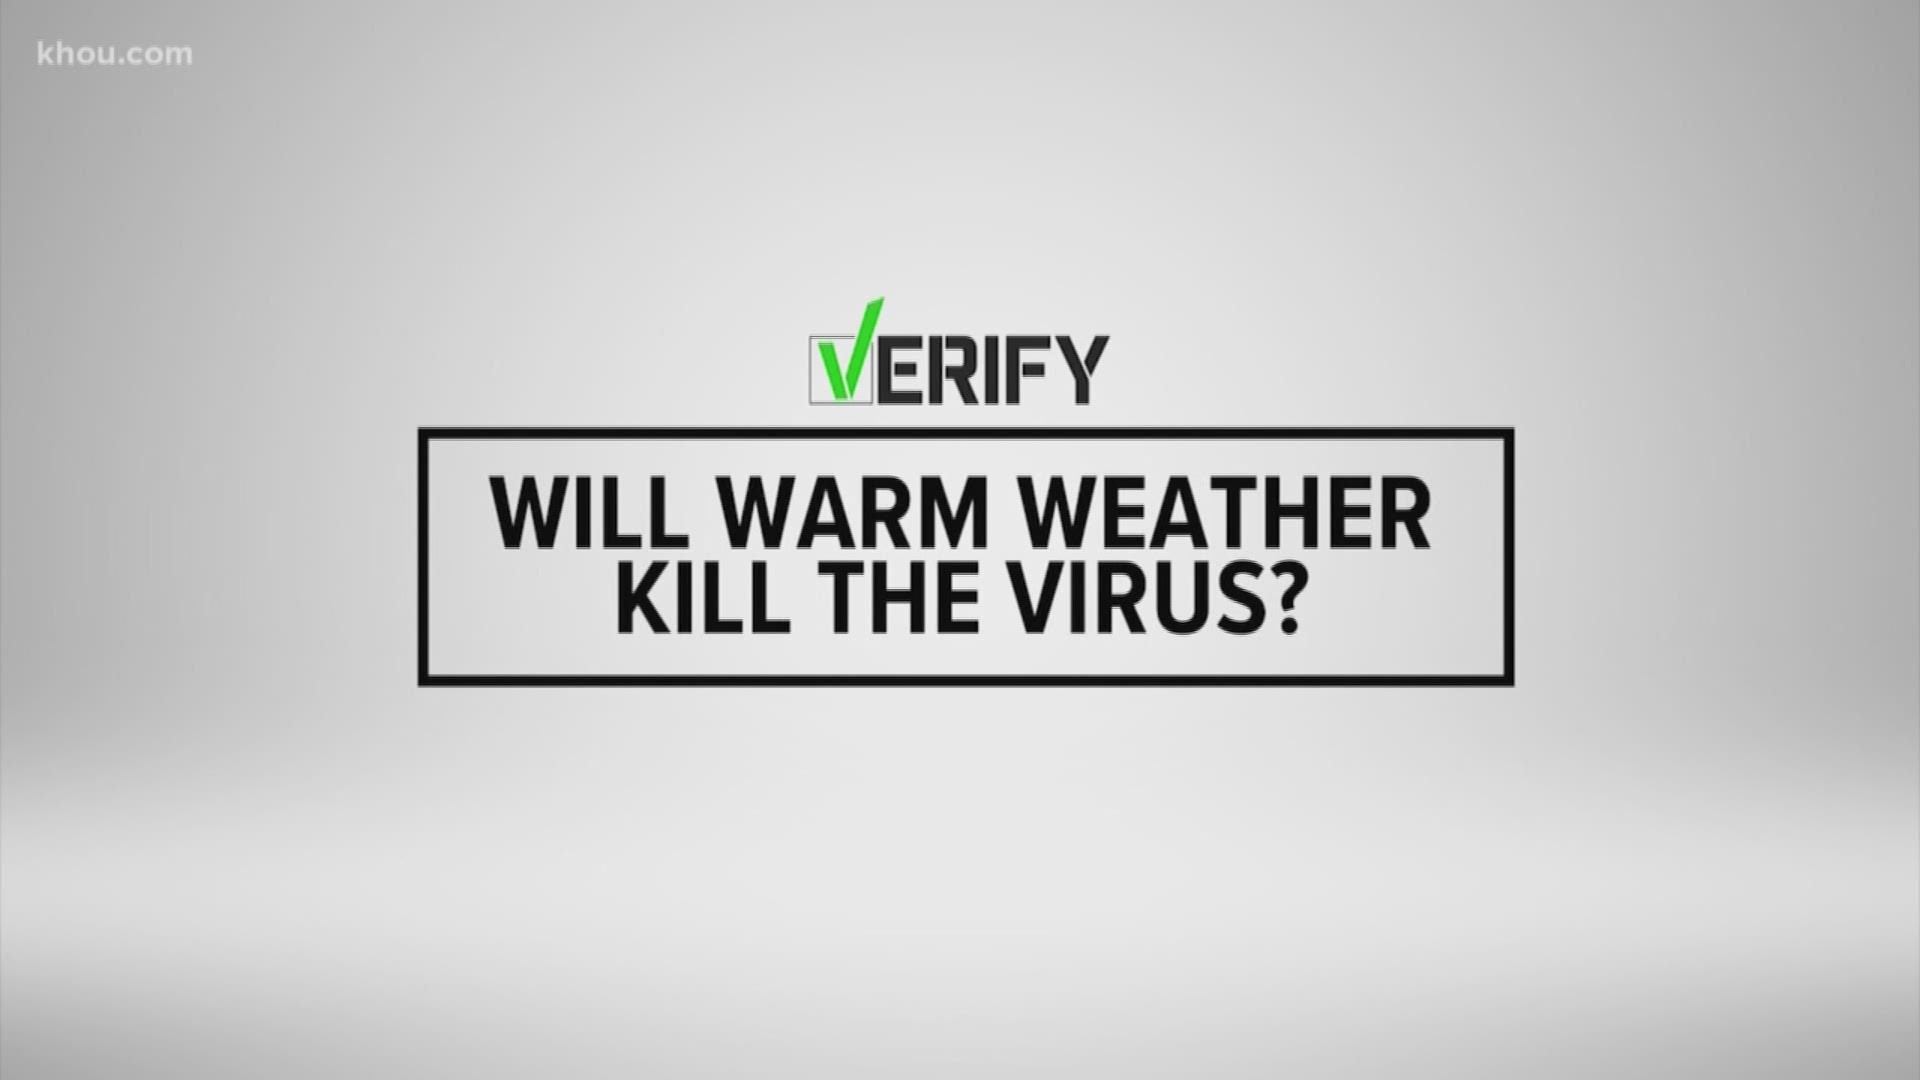 Now that it's spring a lot of people are wondering will warmer weather kill the coronavirus? David Schechter verifies.